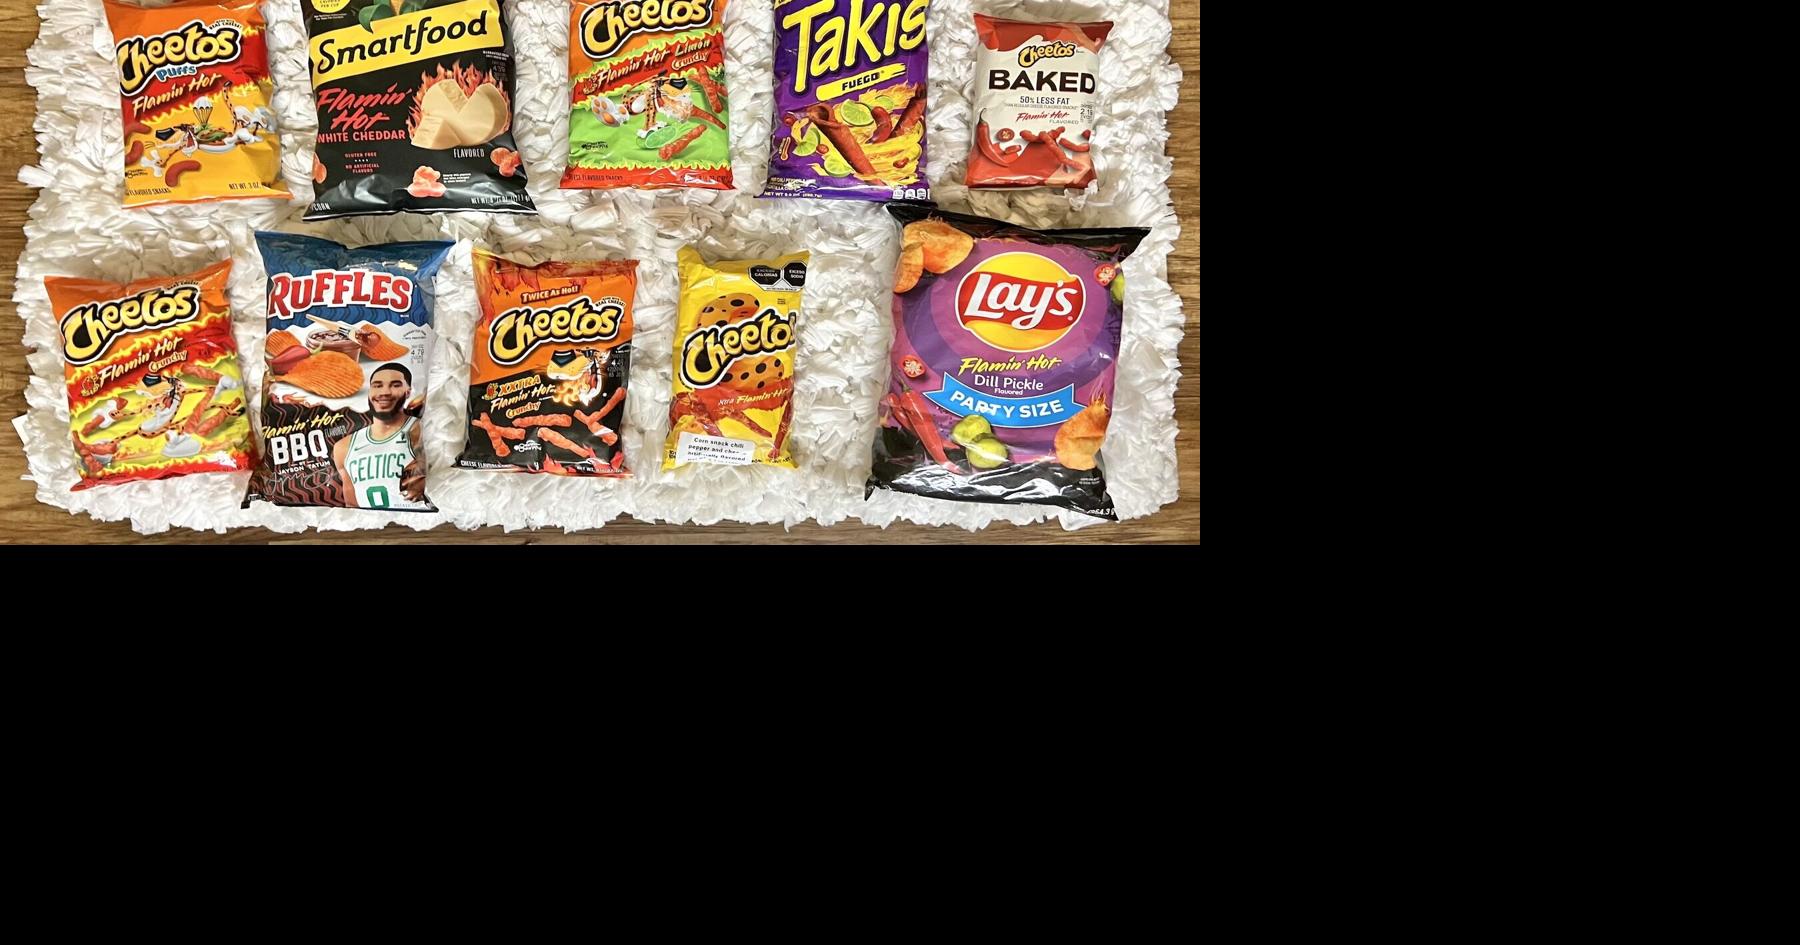 Cheetos+Flamin+Hot+Crunchy+Chips+Puffs+Cheese+Pick+One for sale